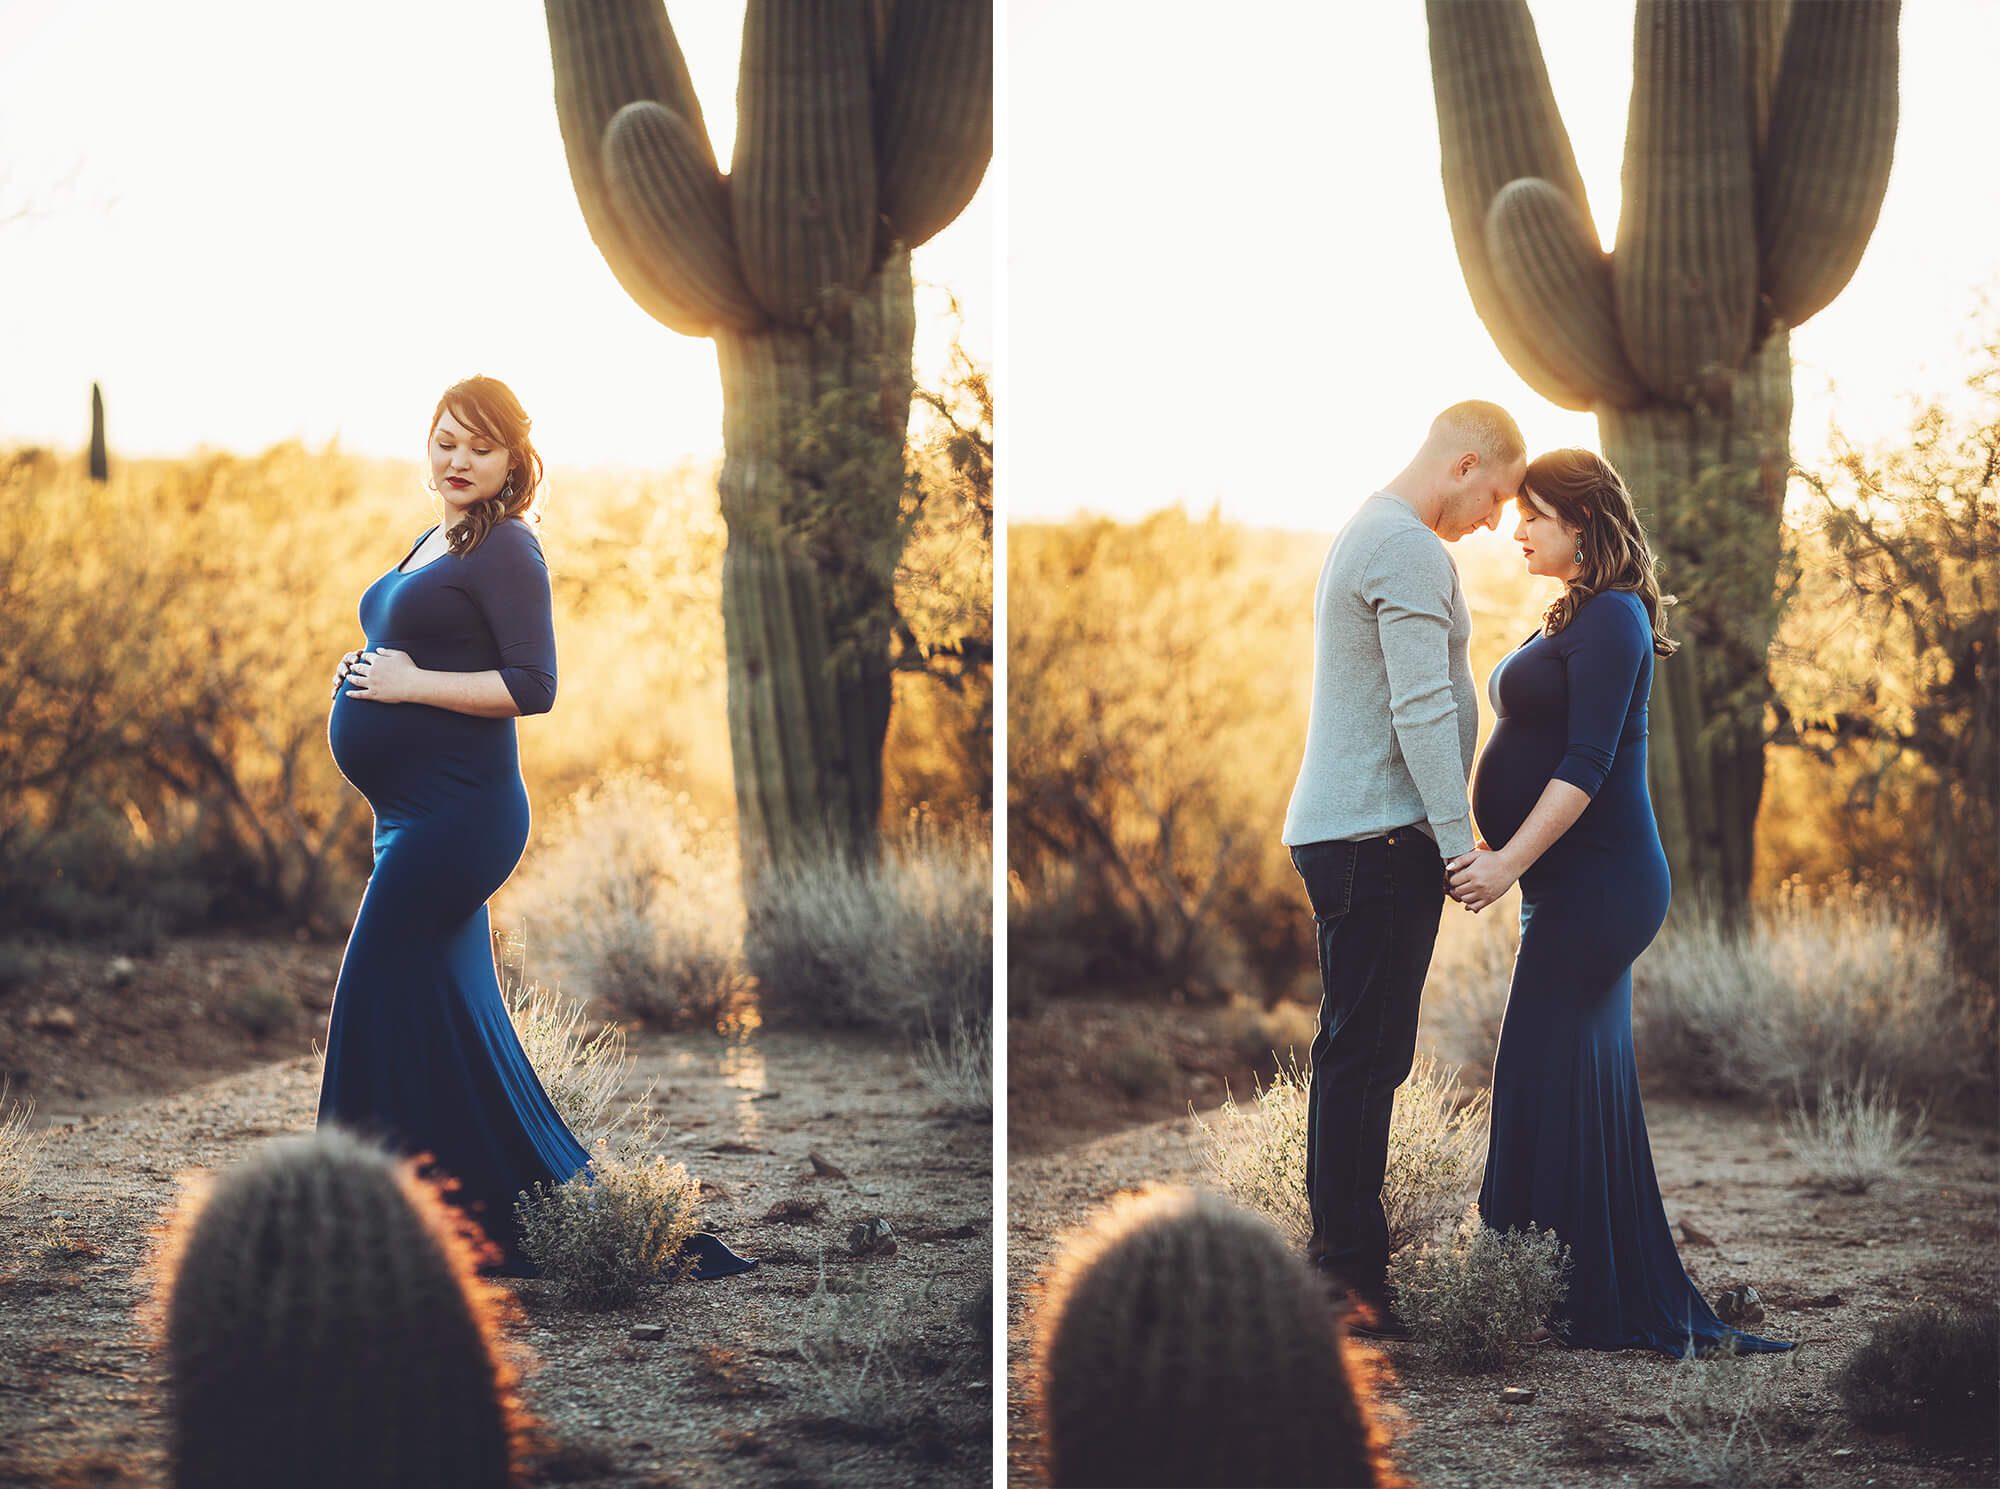 Sunset and breathtaking saguaros for Alicia during her maternity session